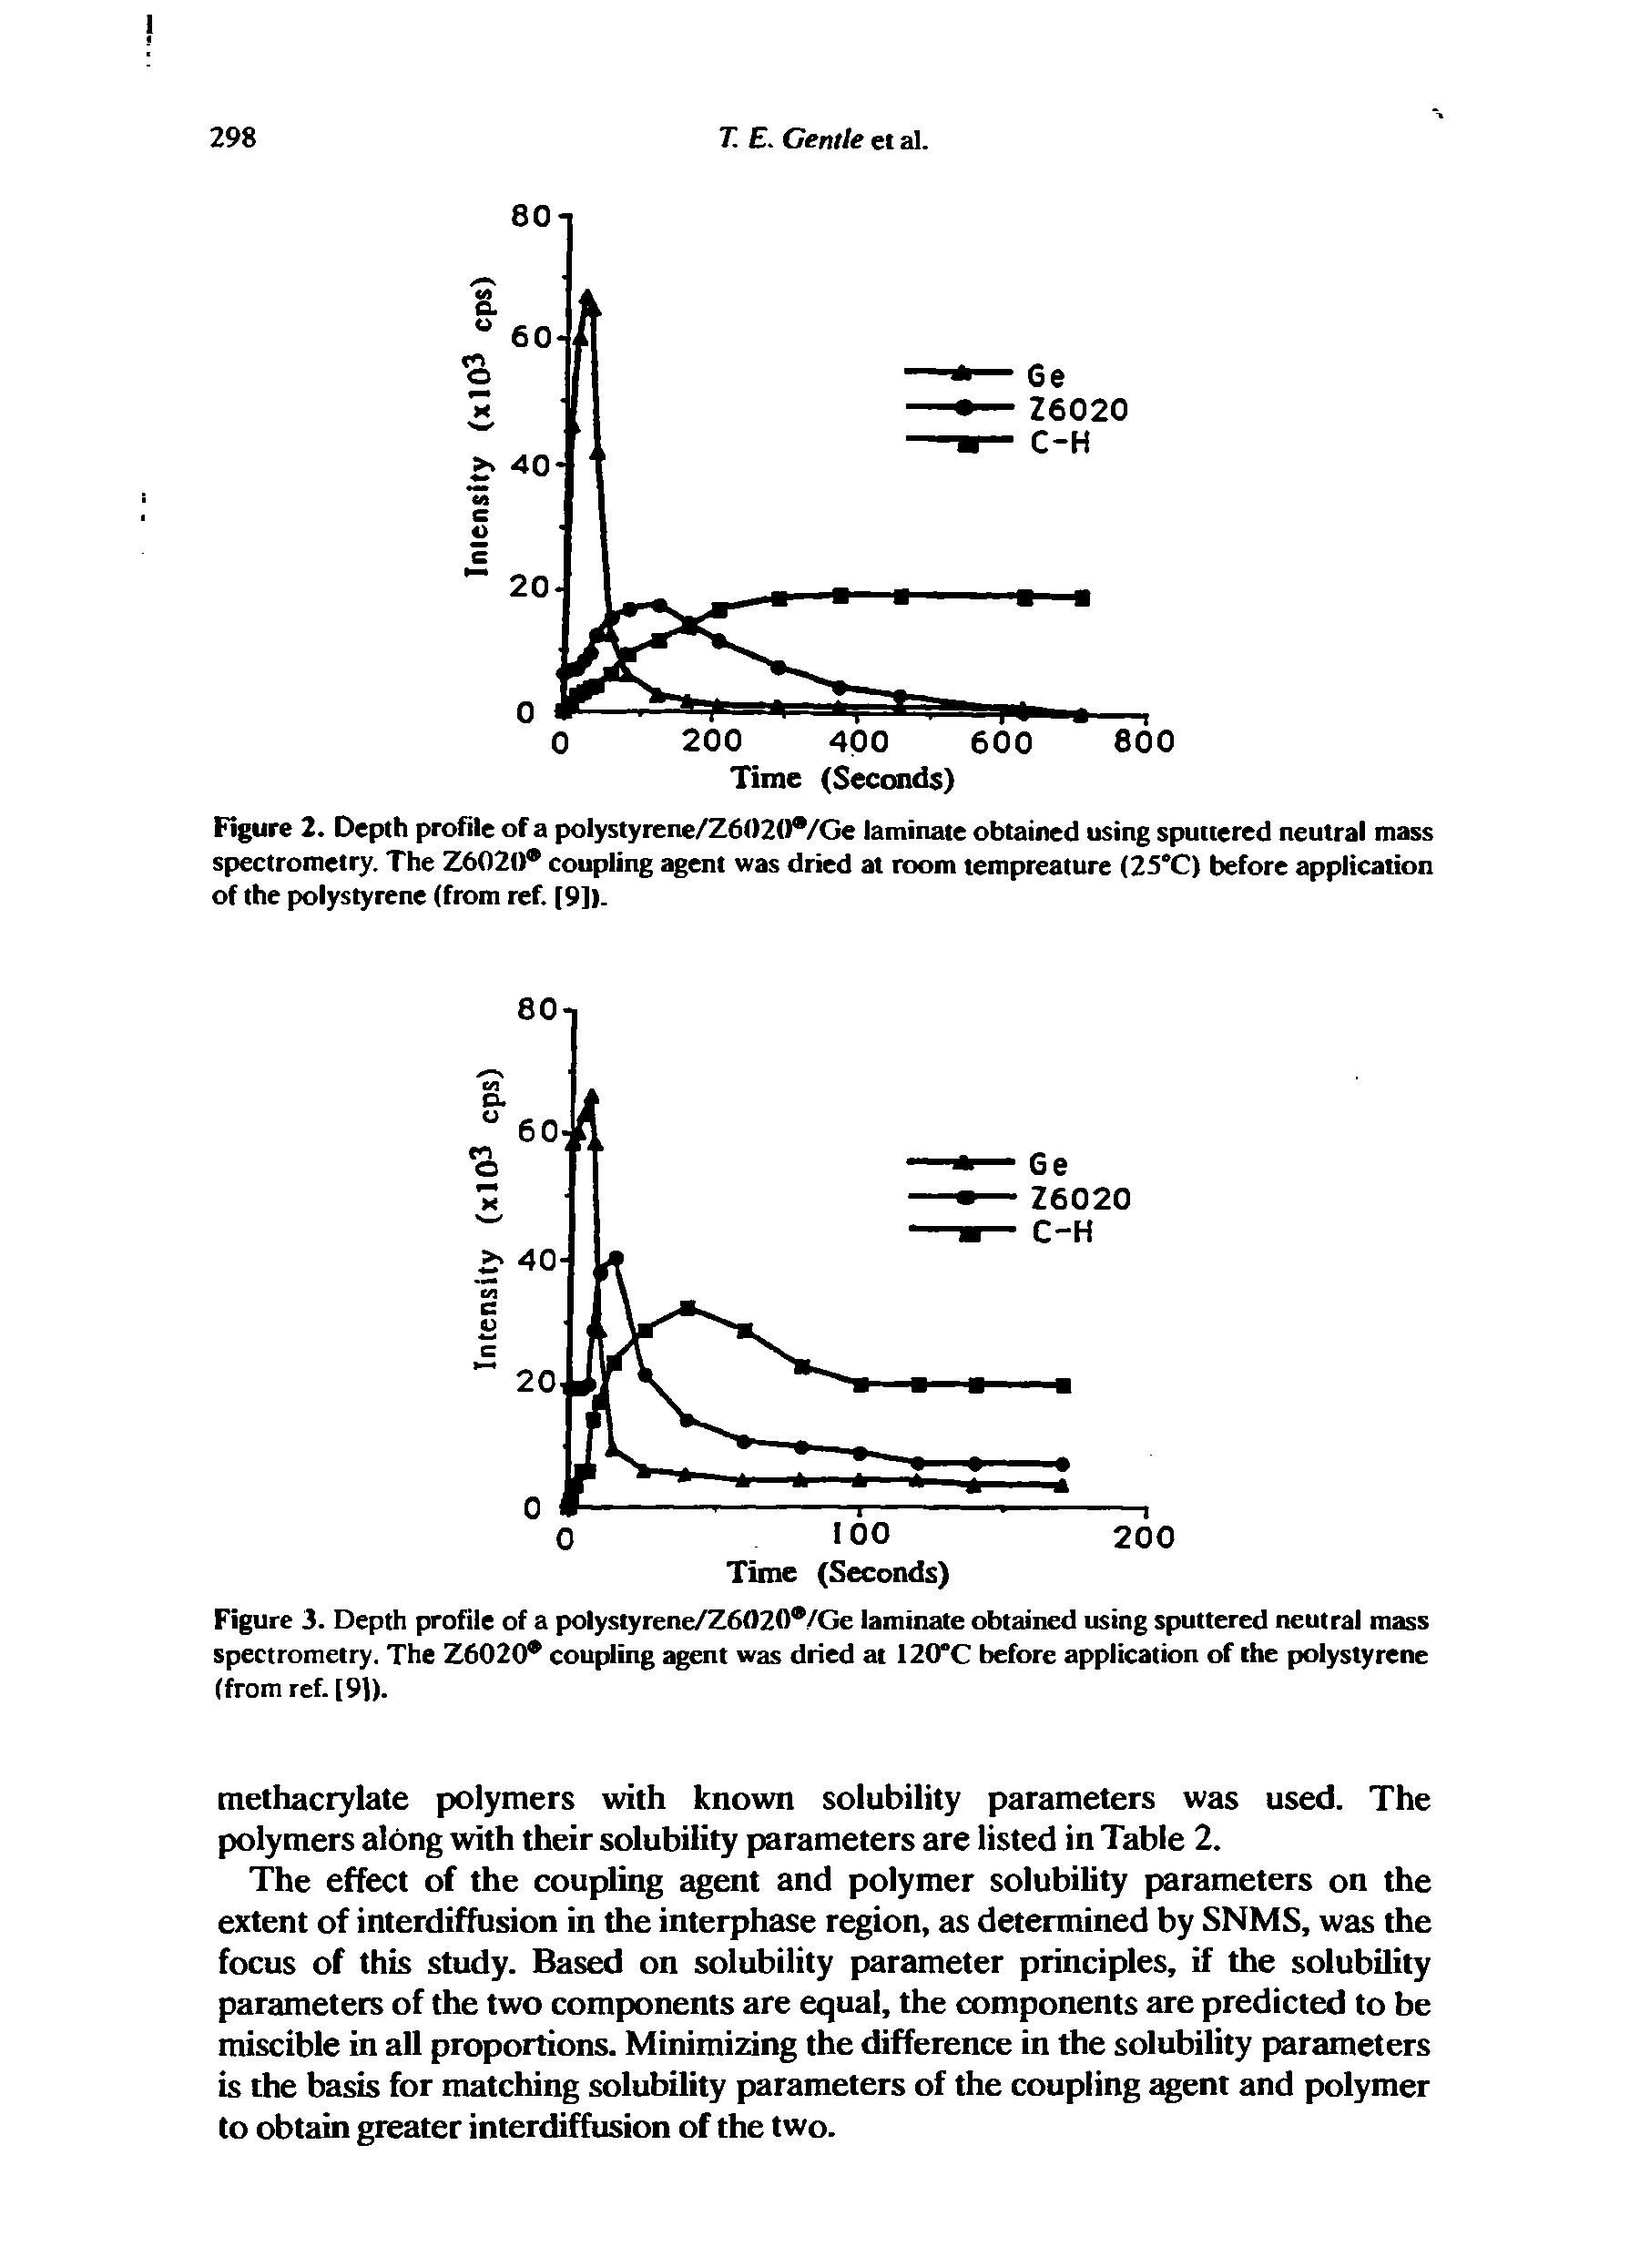 Figure 2. Depth profile of a polystyrene/Z6020 /Ge laminate obtained using sputtered neutral mass spectrometry. The Z6020 coupling agent was dried at room tempreature (25°C) before application of the polystyrene (from ref. [9]).